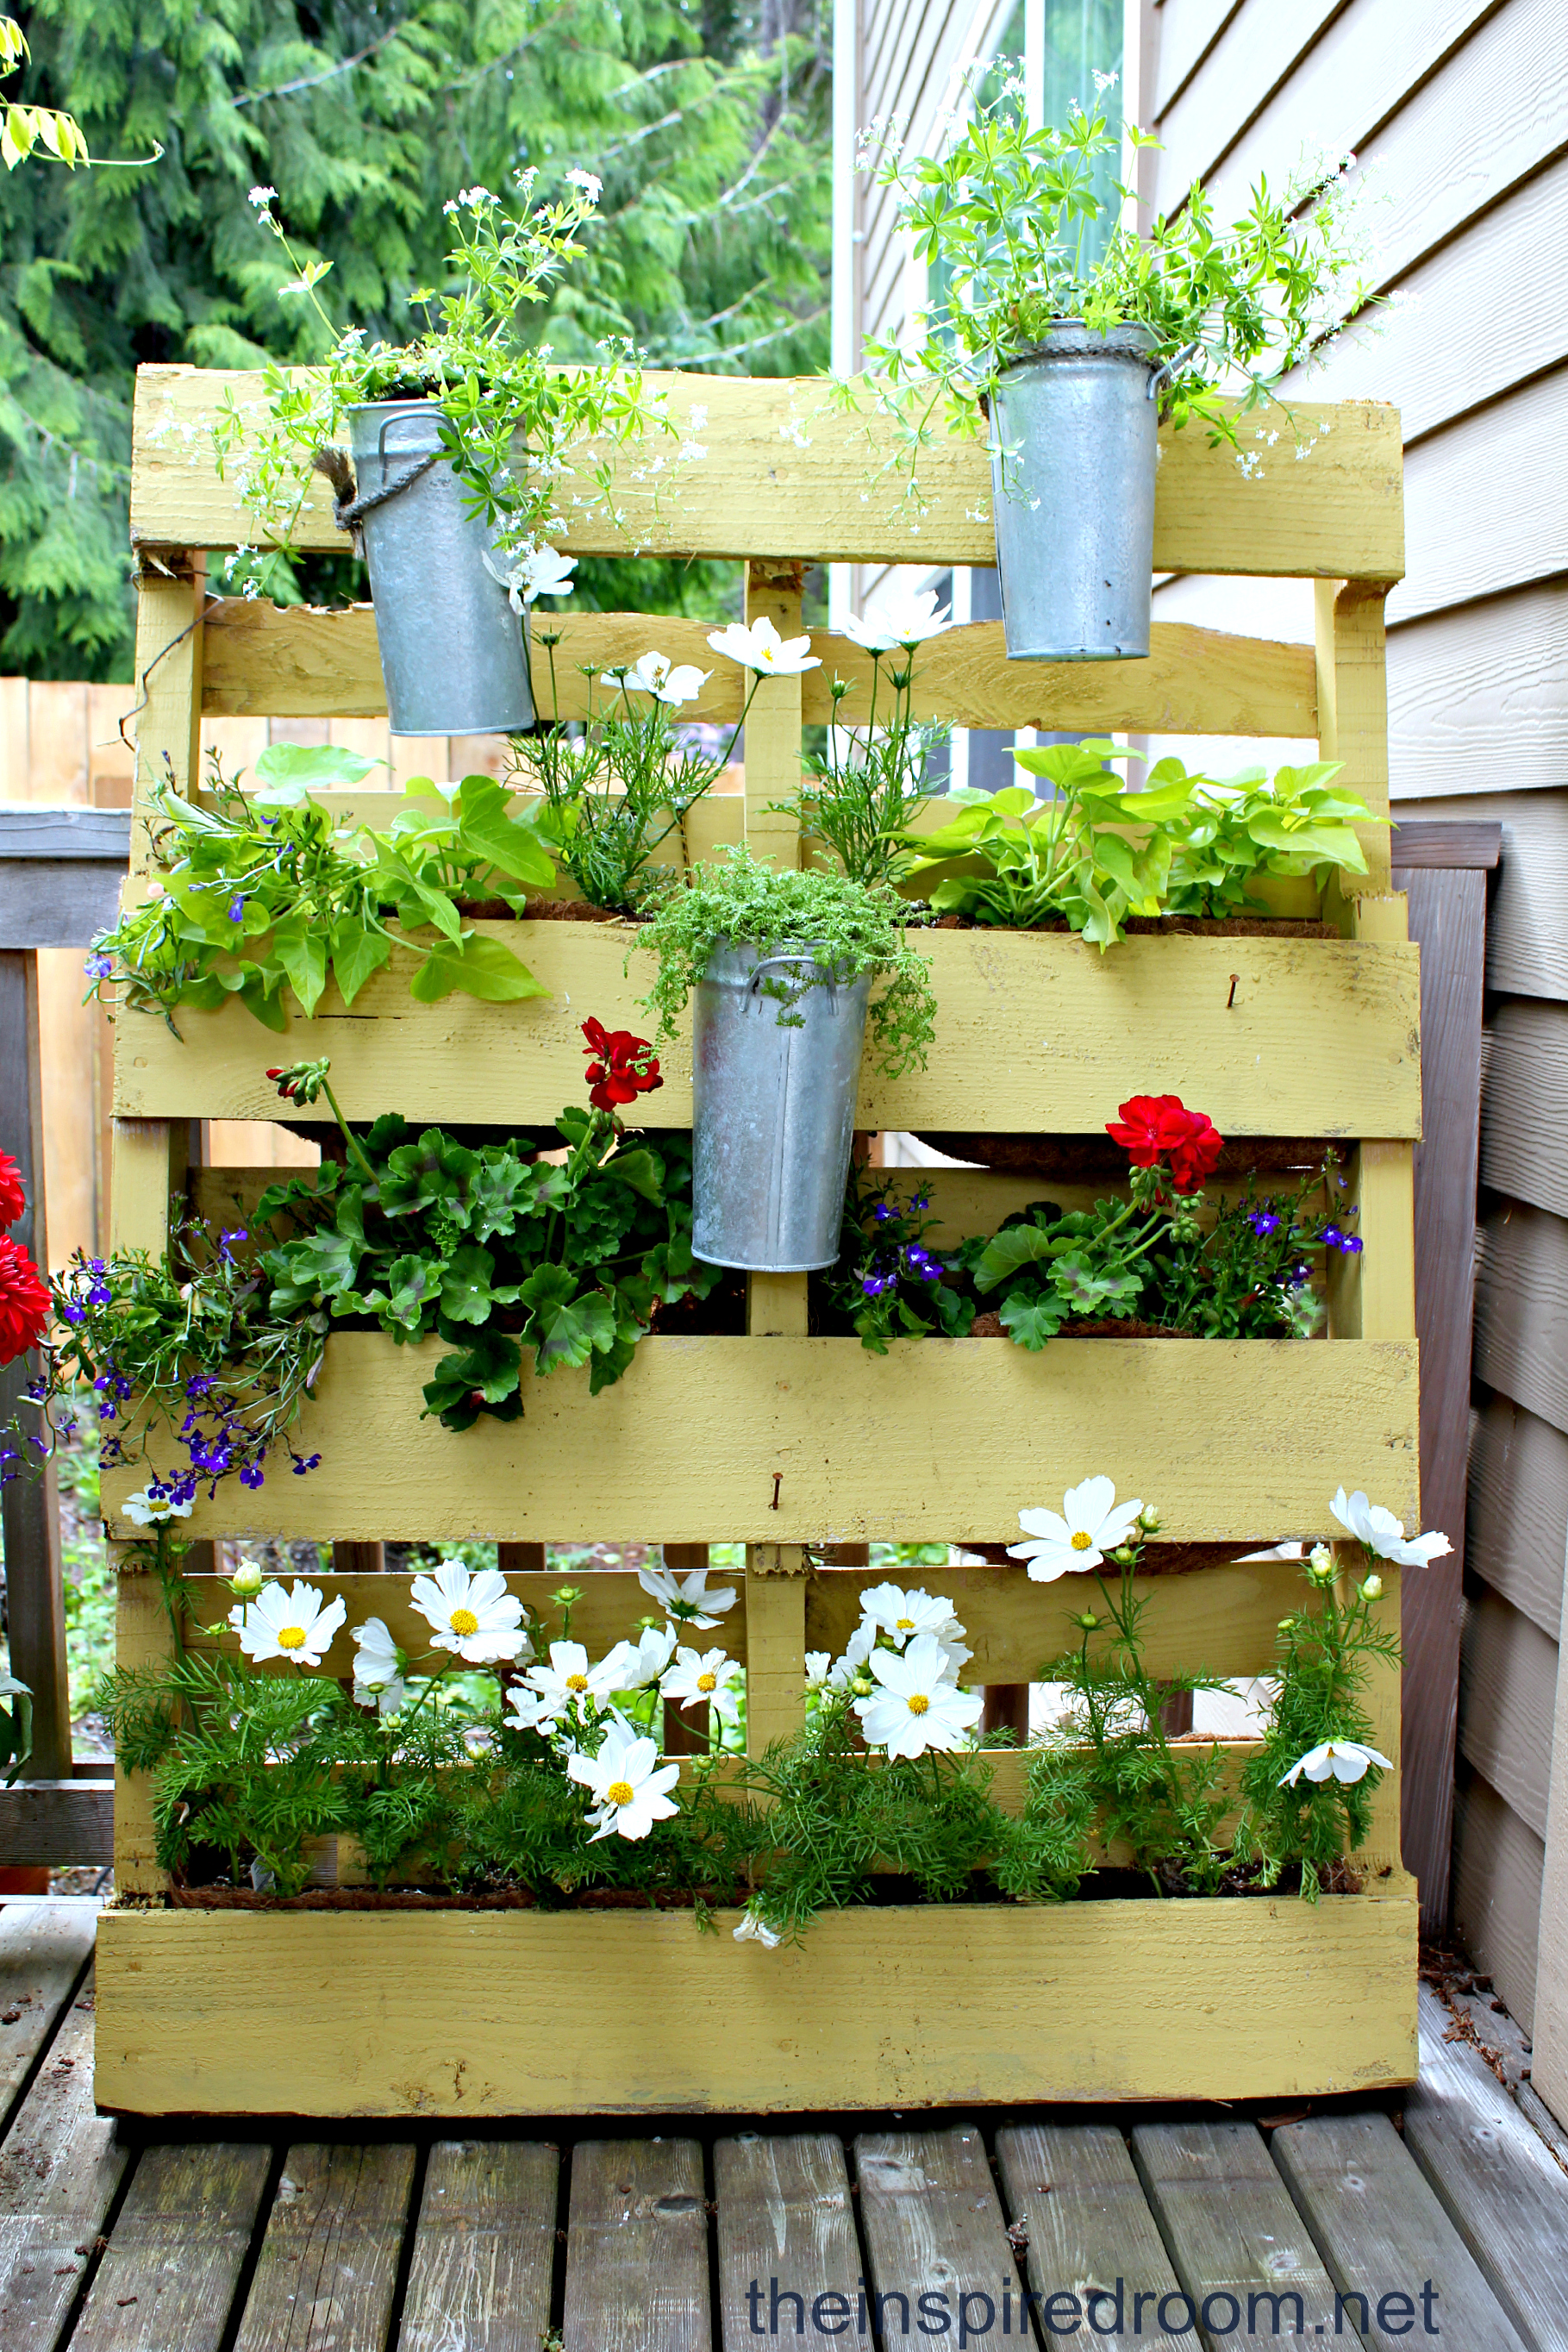 The Pallet Garden {re-mix 2012} - The Inspired Room